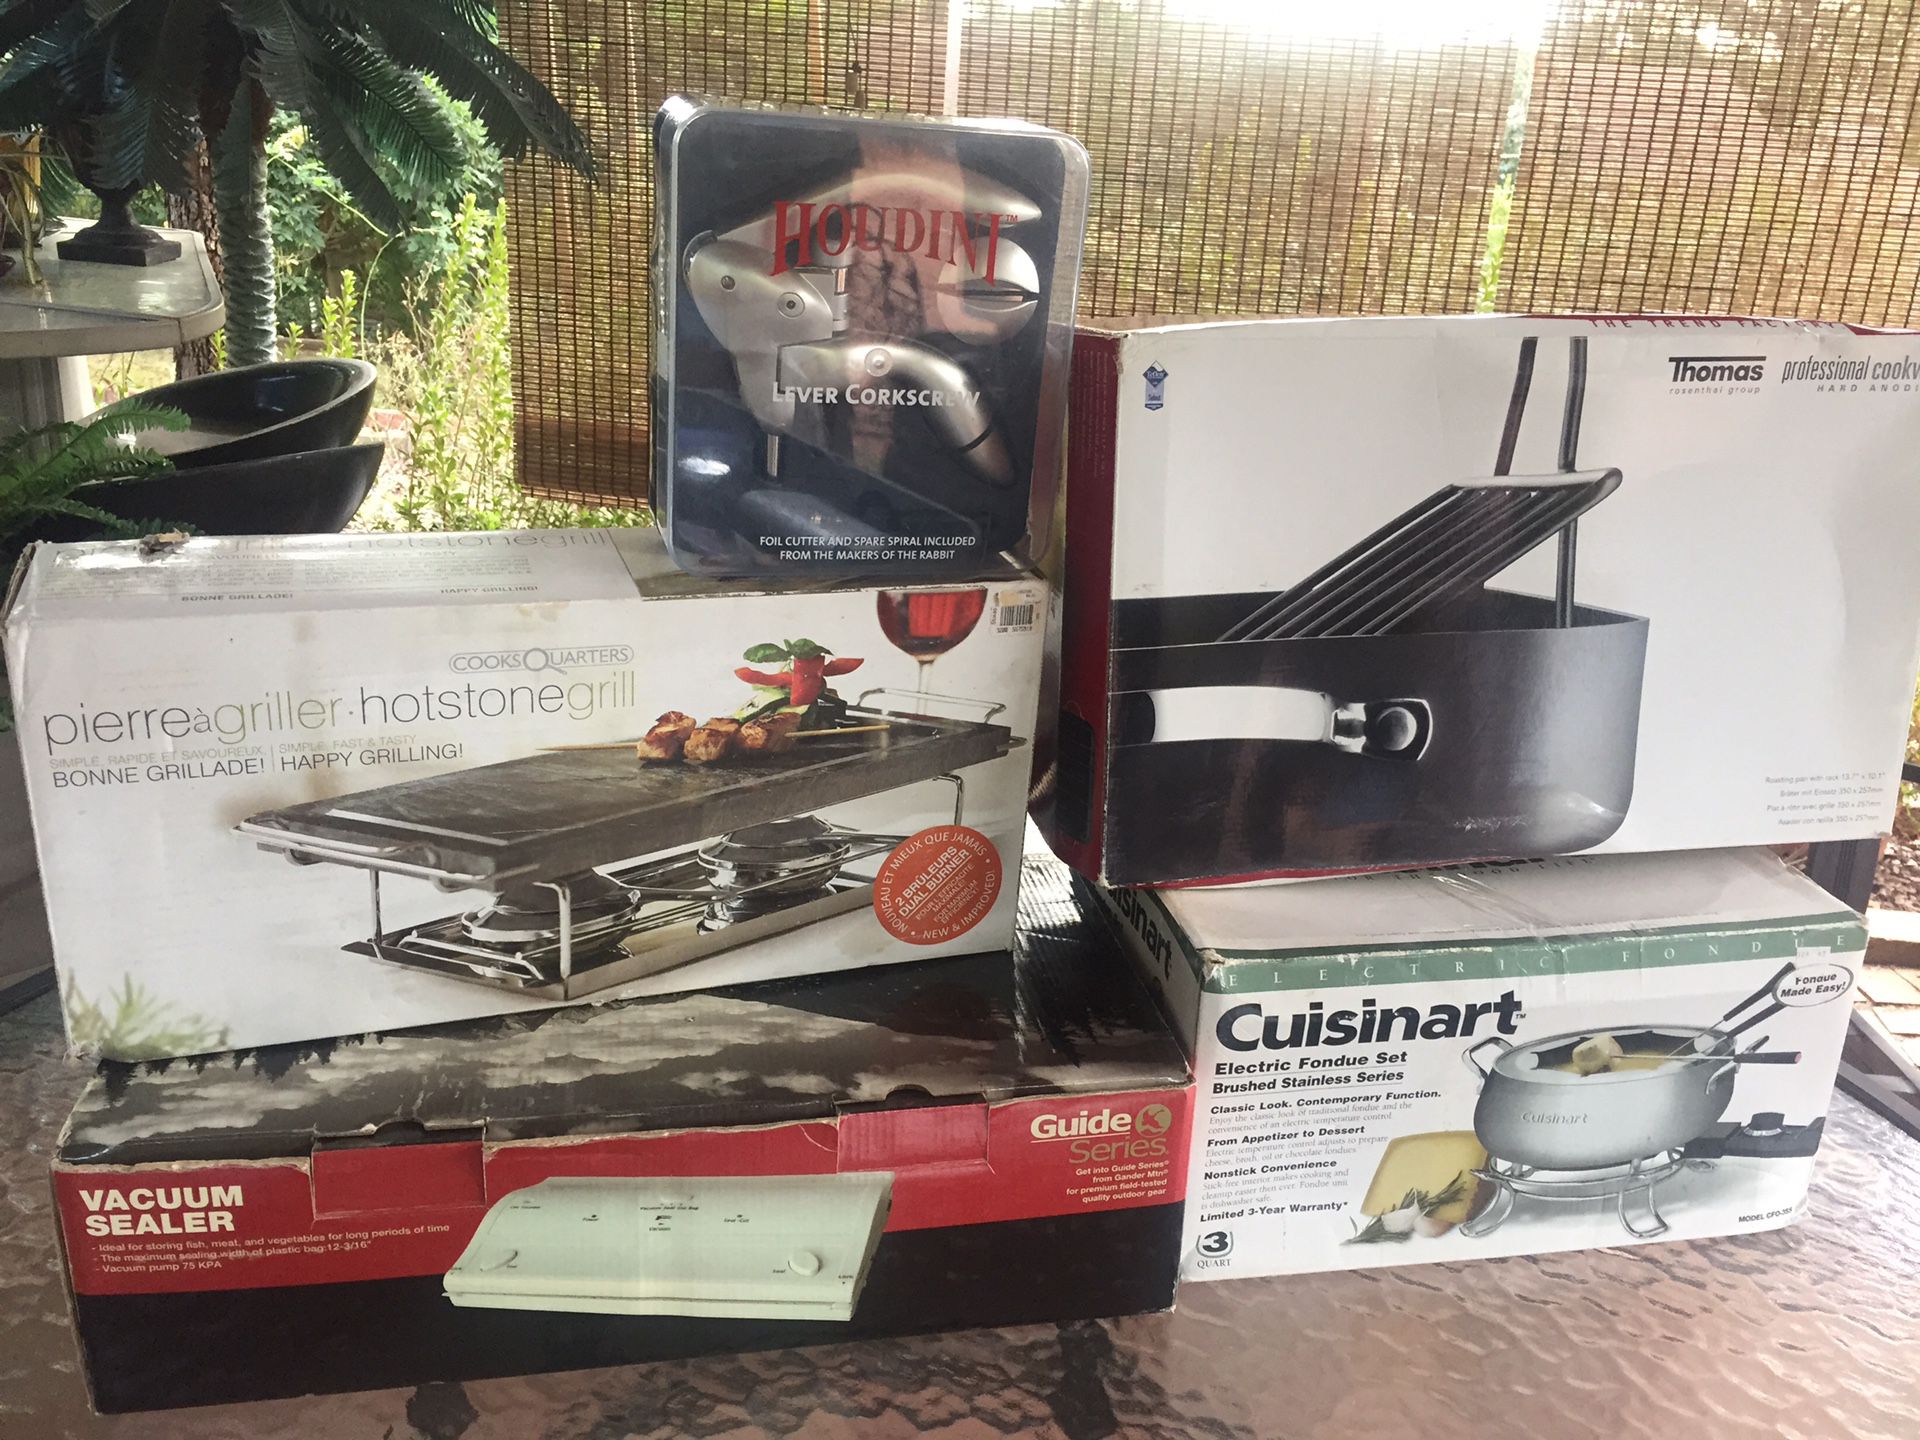 New Kitchen Items for $45